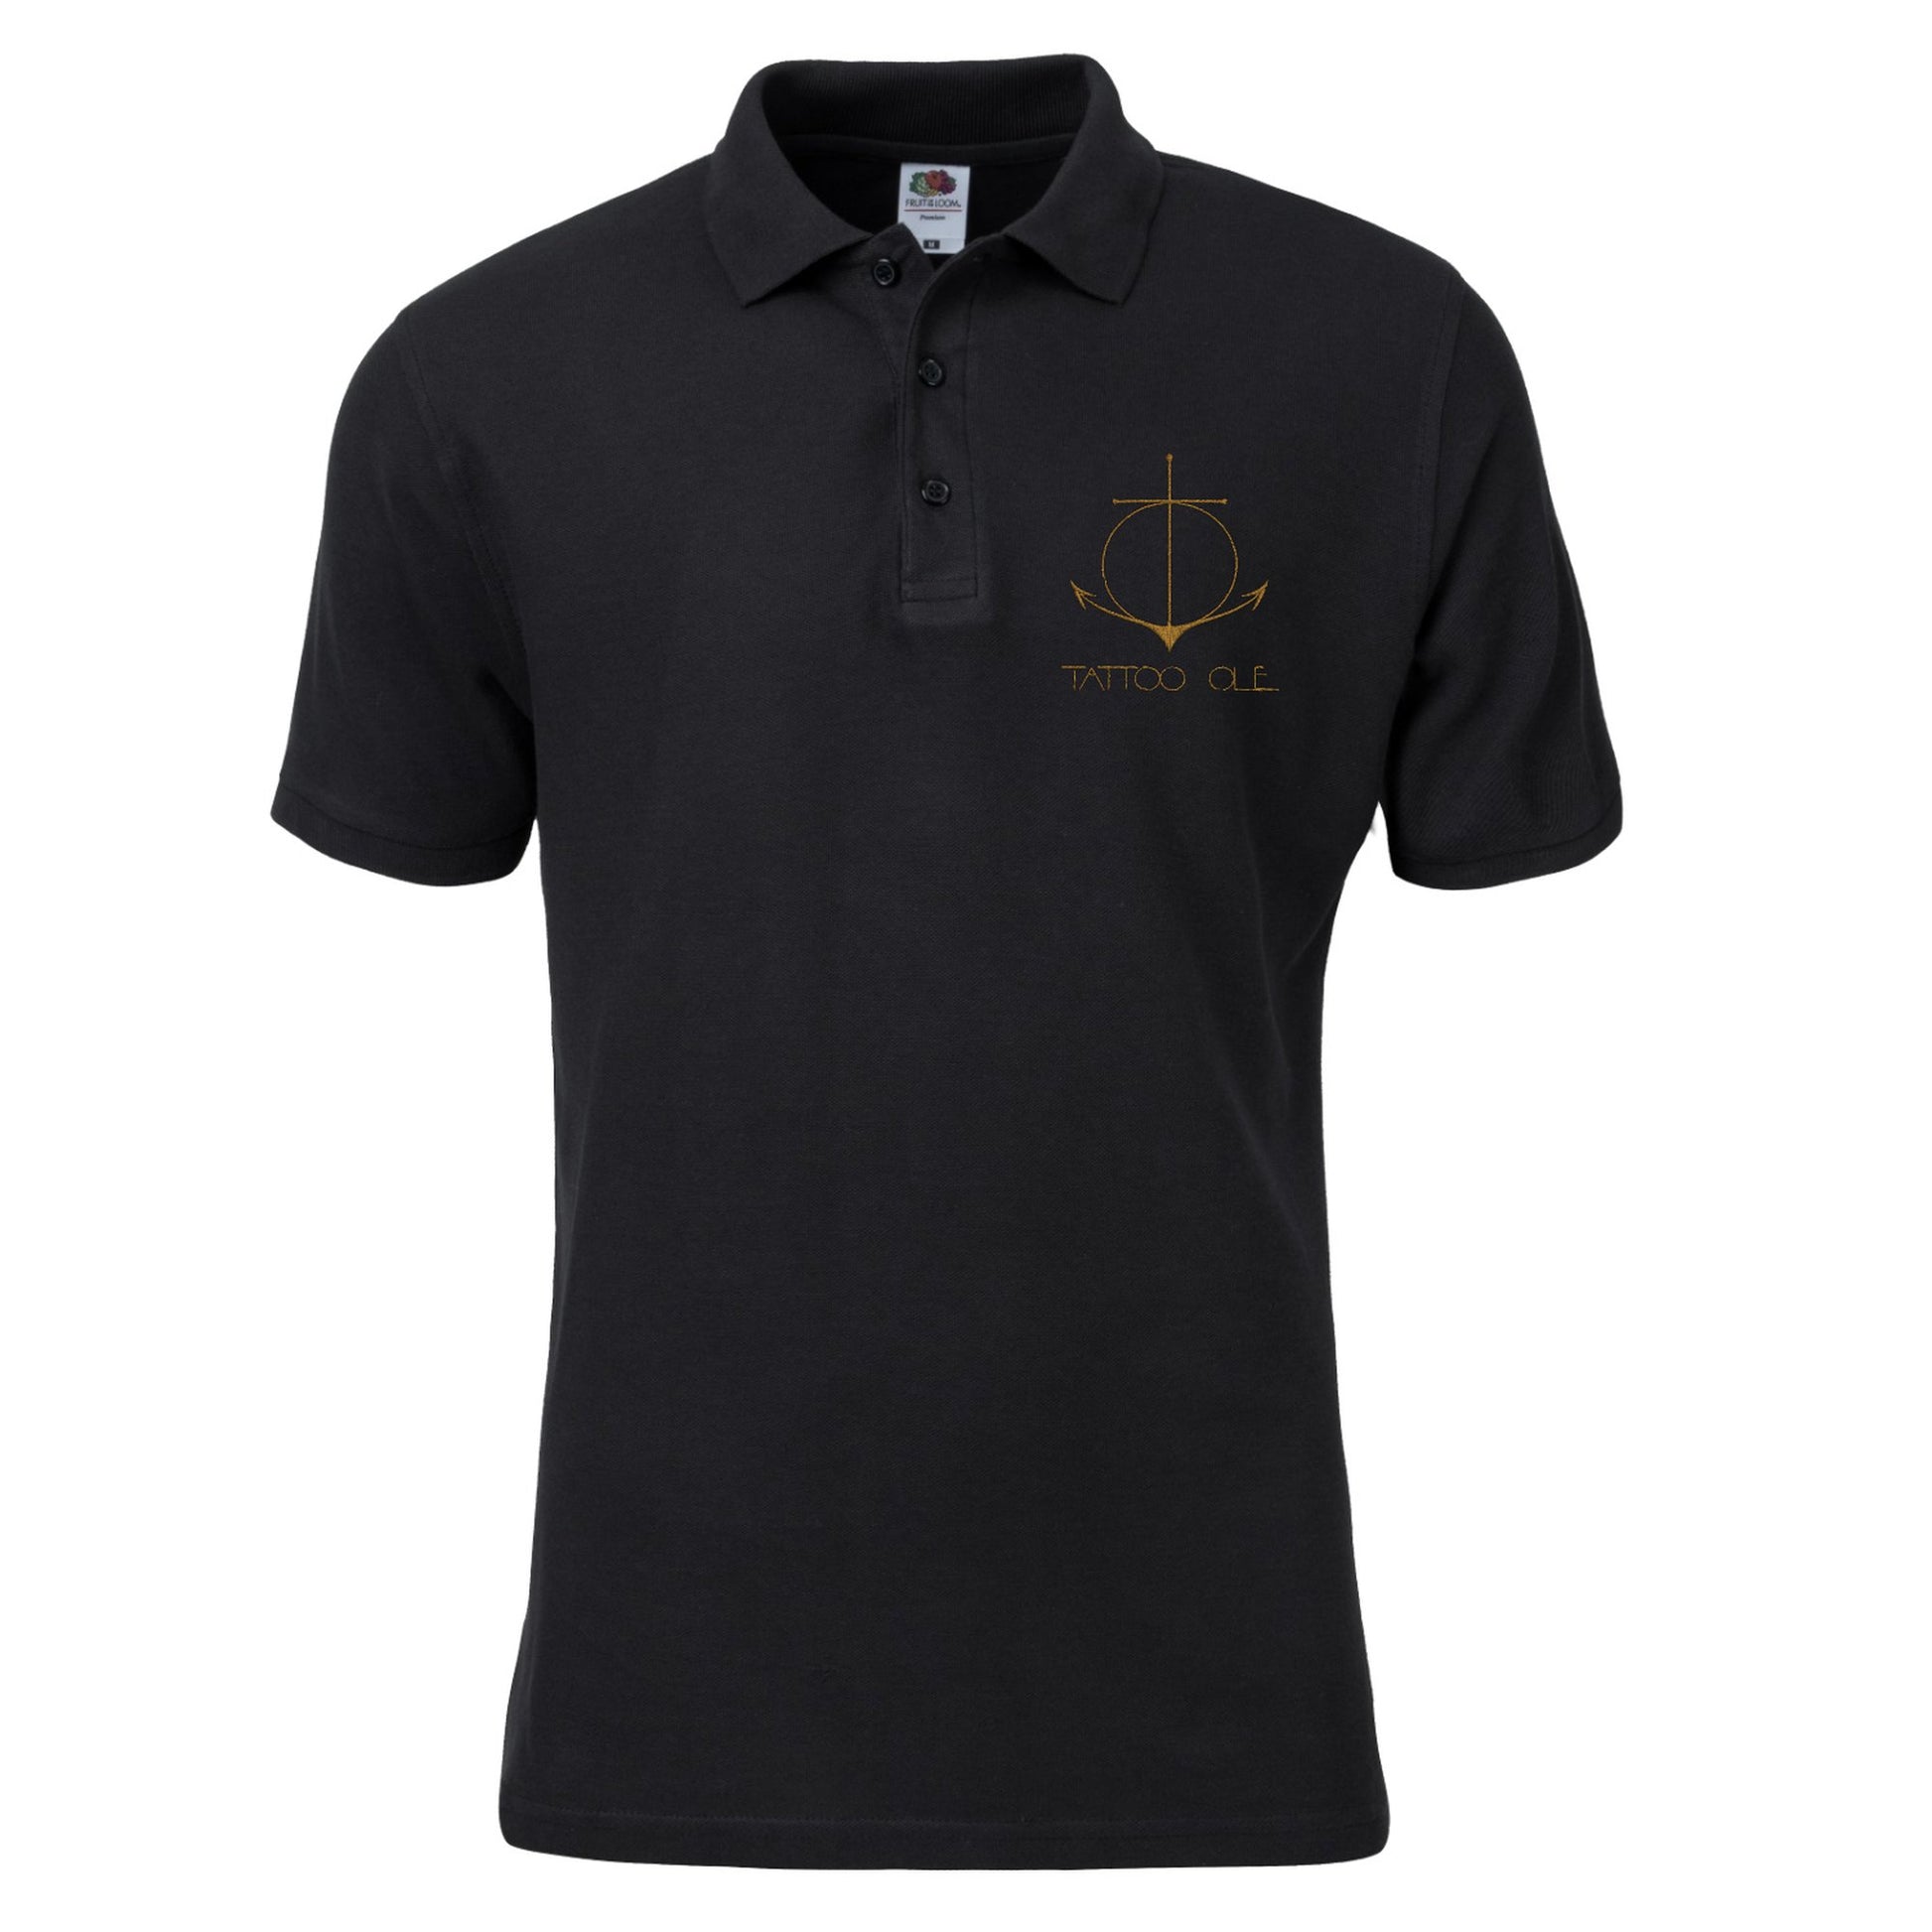 Classic black polo with Tattoo Ole Nyhavn 17 anchor